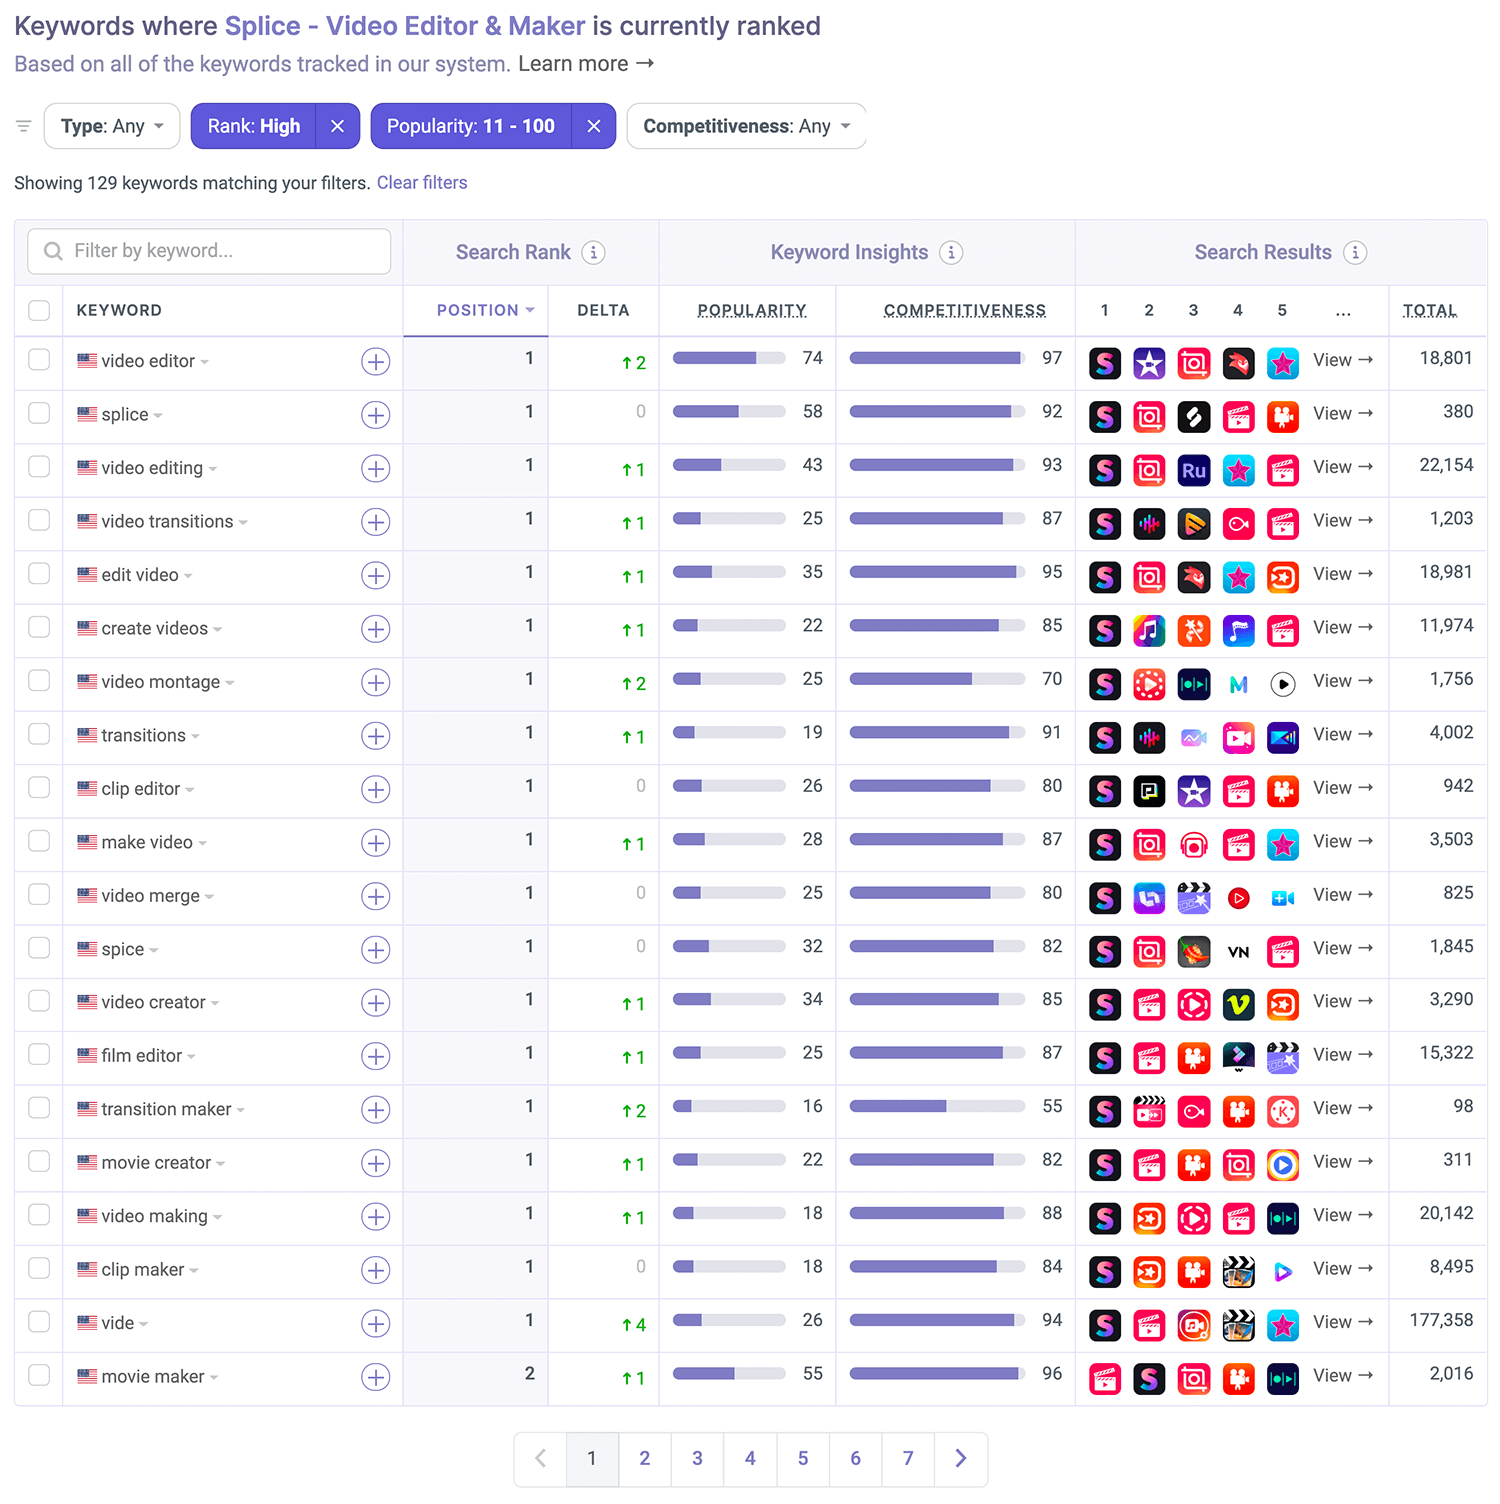 Where Splice is ranked on the App Store by Appfigures